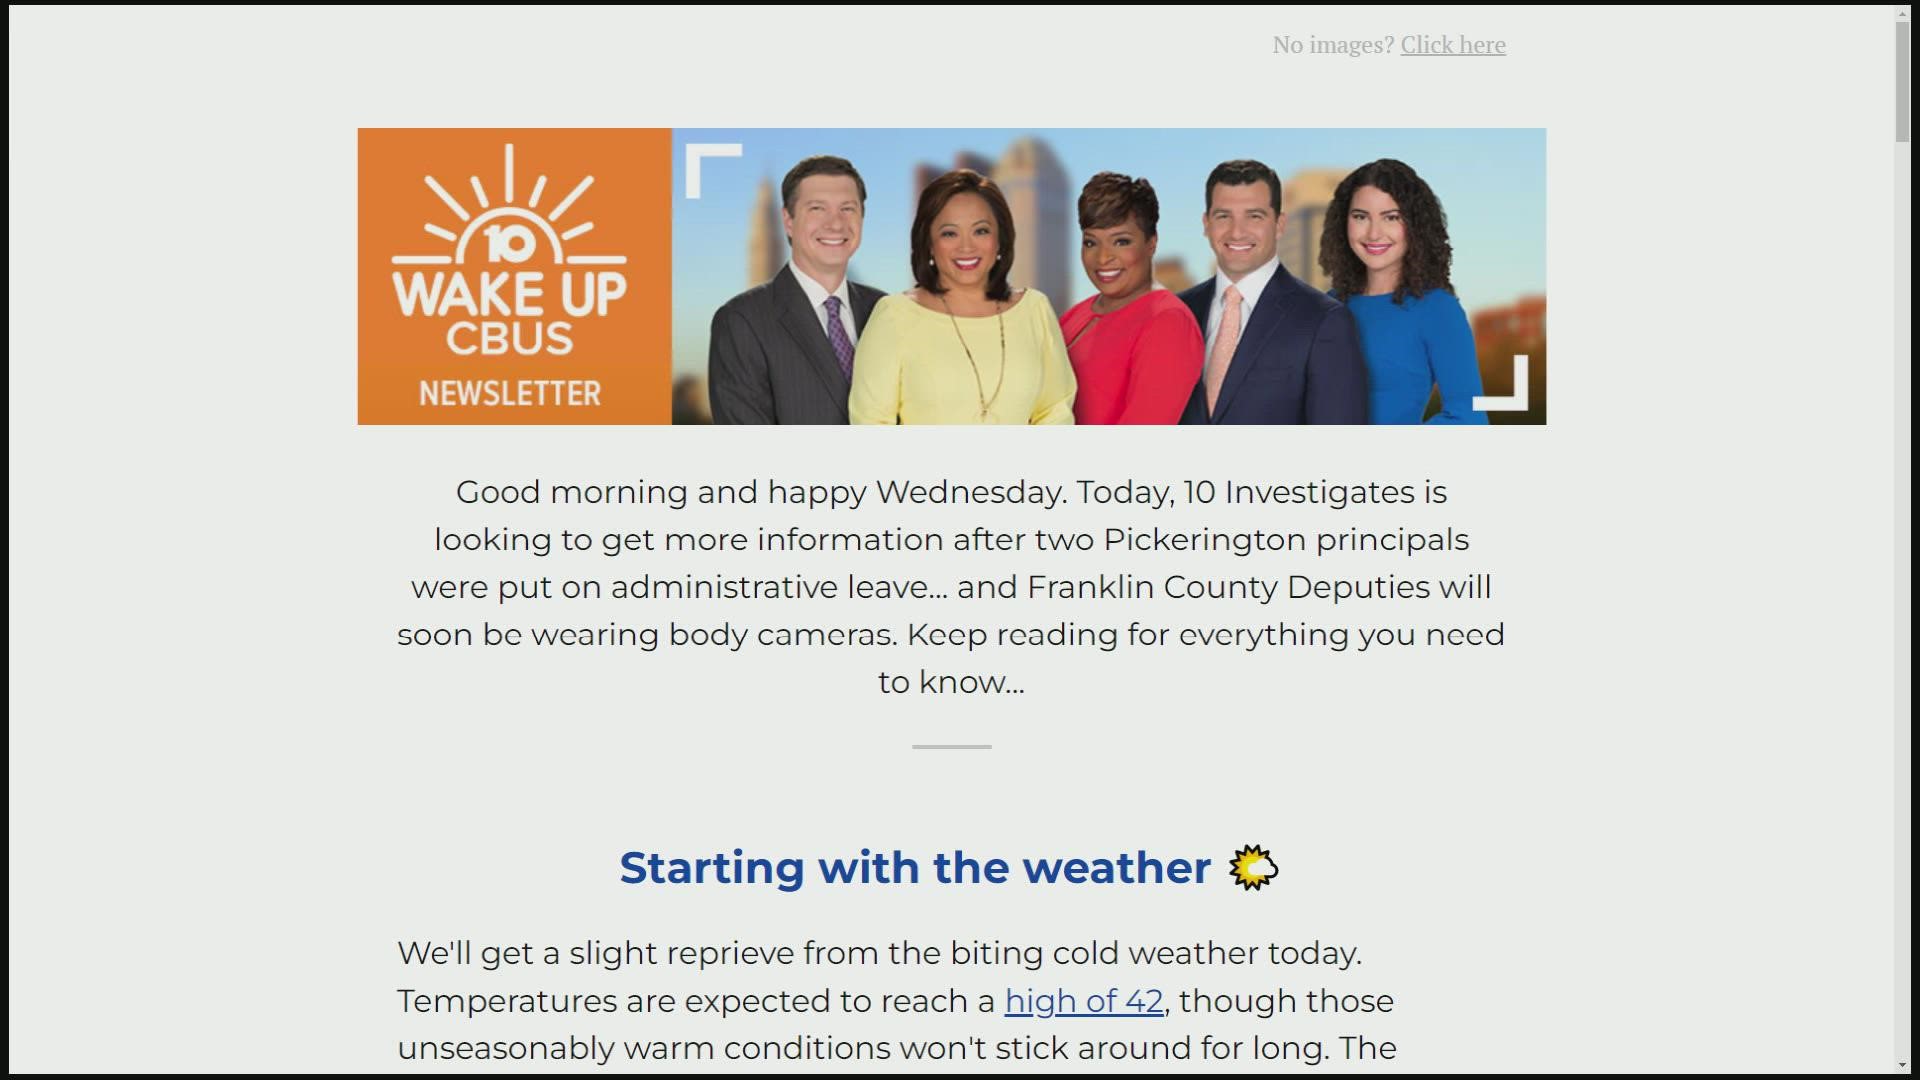 The newsletter is personally written by members of the 10TV team to get you up to speed on the day's biggest stories.